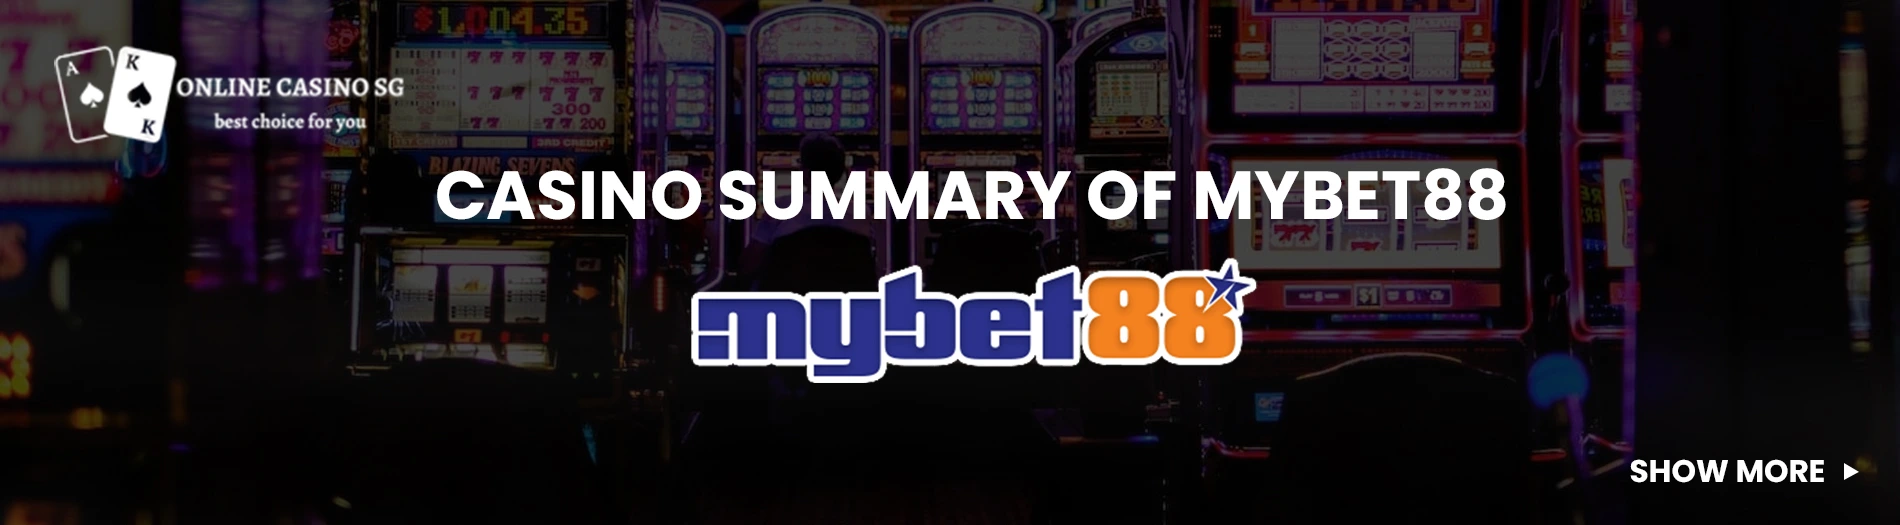 mybet88 (MB8) online casino in Singapore.